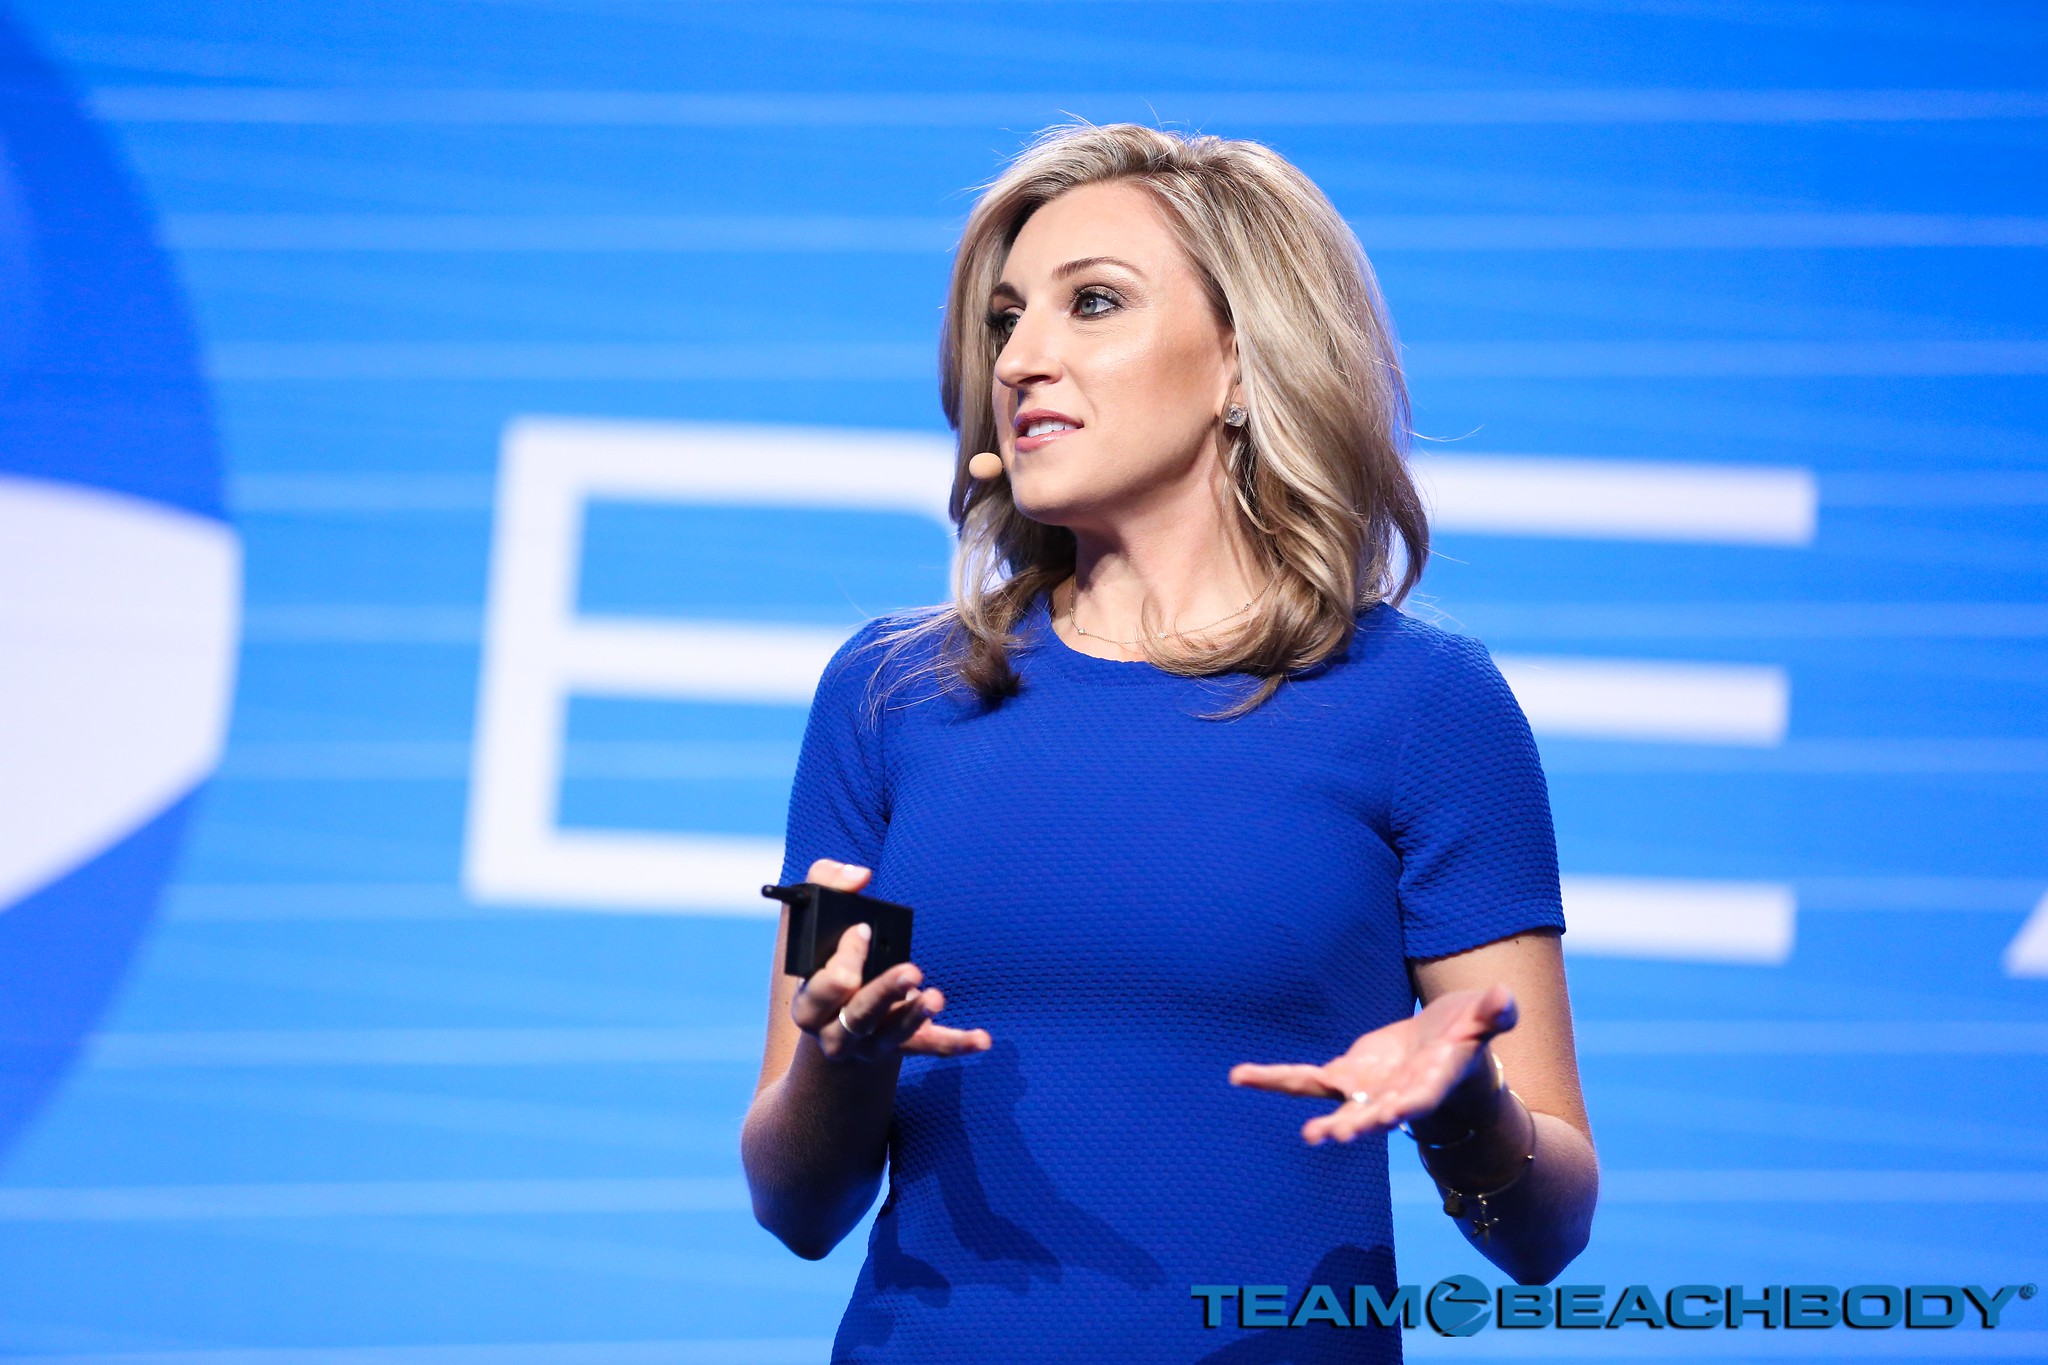 Are You Ready To Become A Leader In The Top Team In Team Beachbody?